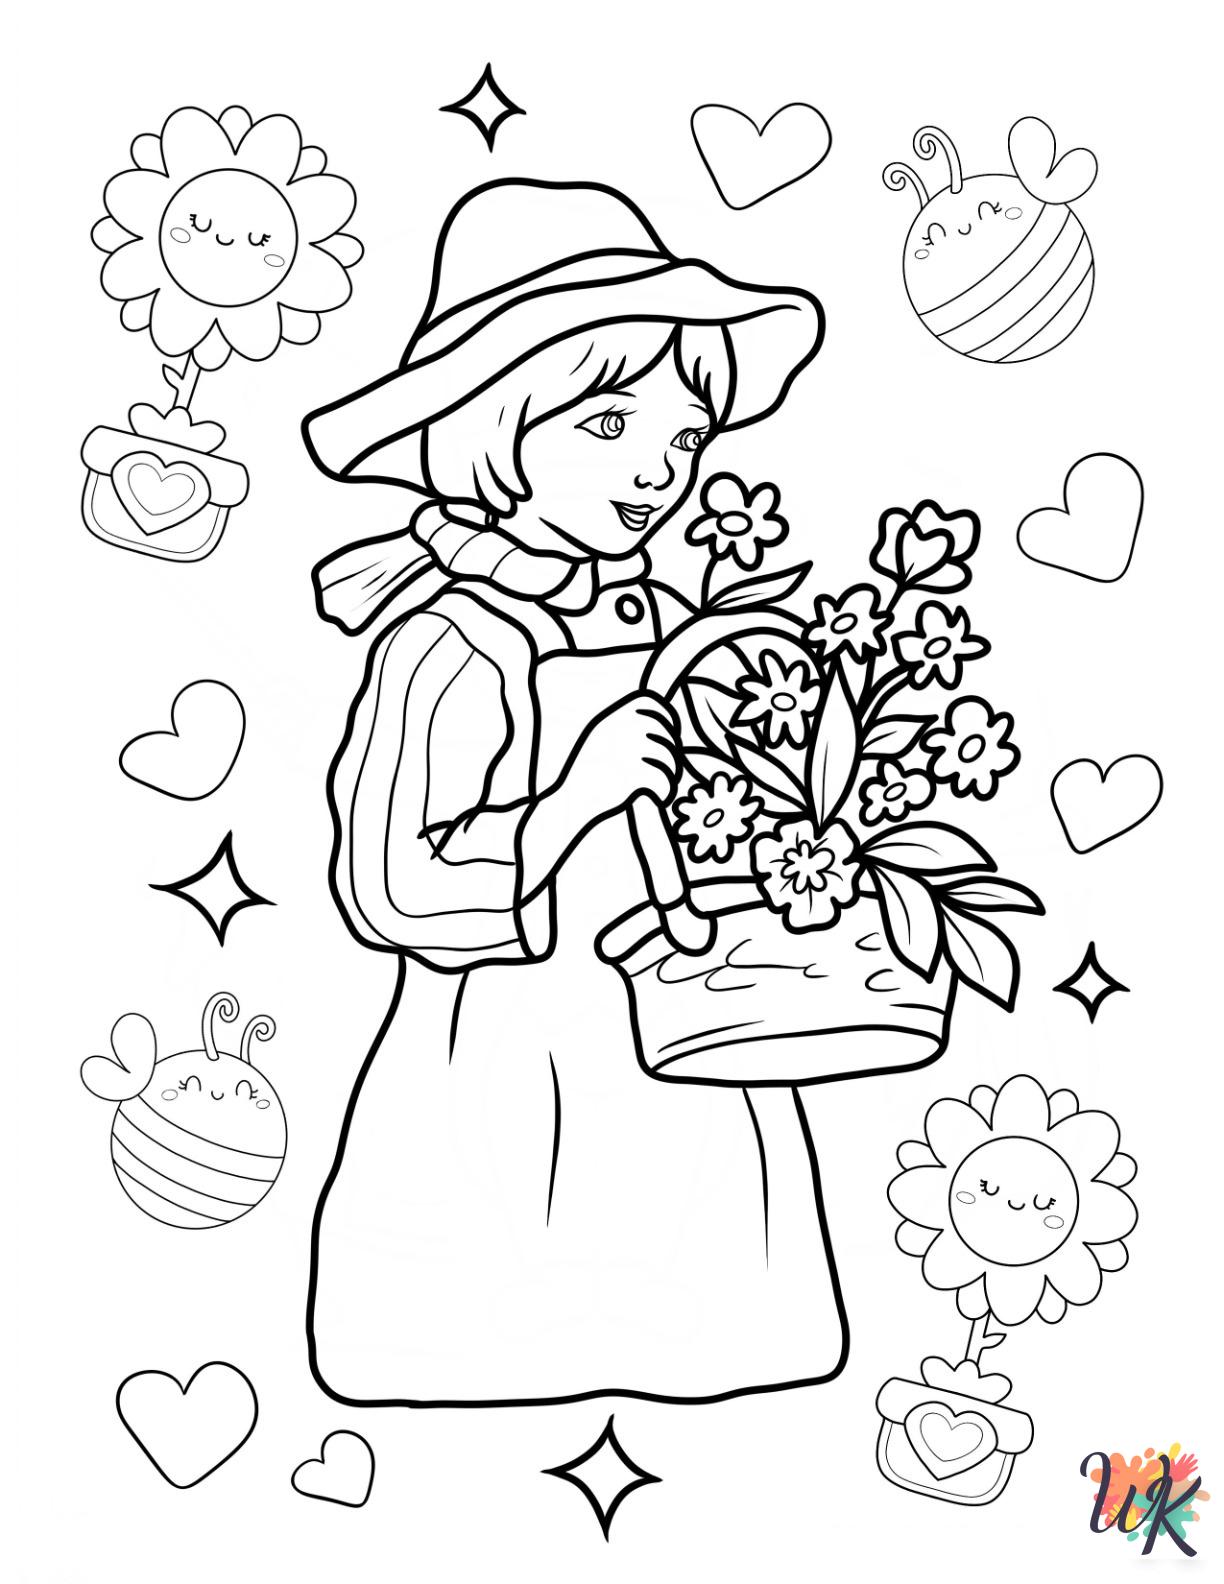 Spring coloring pages for adults easy